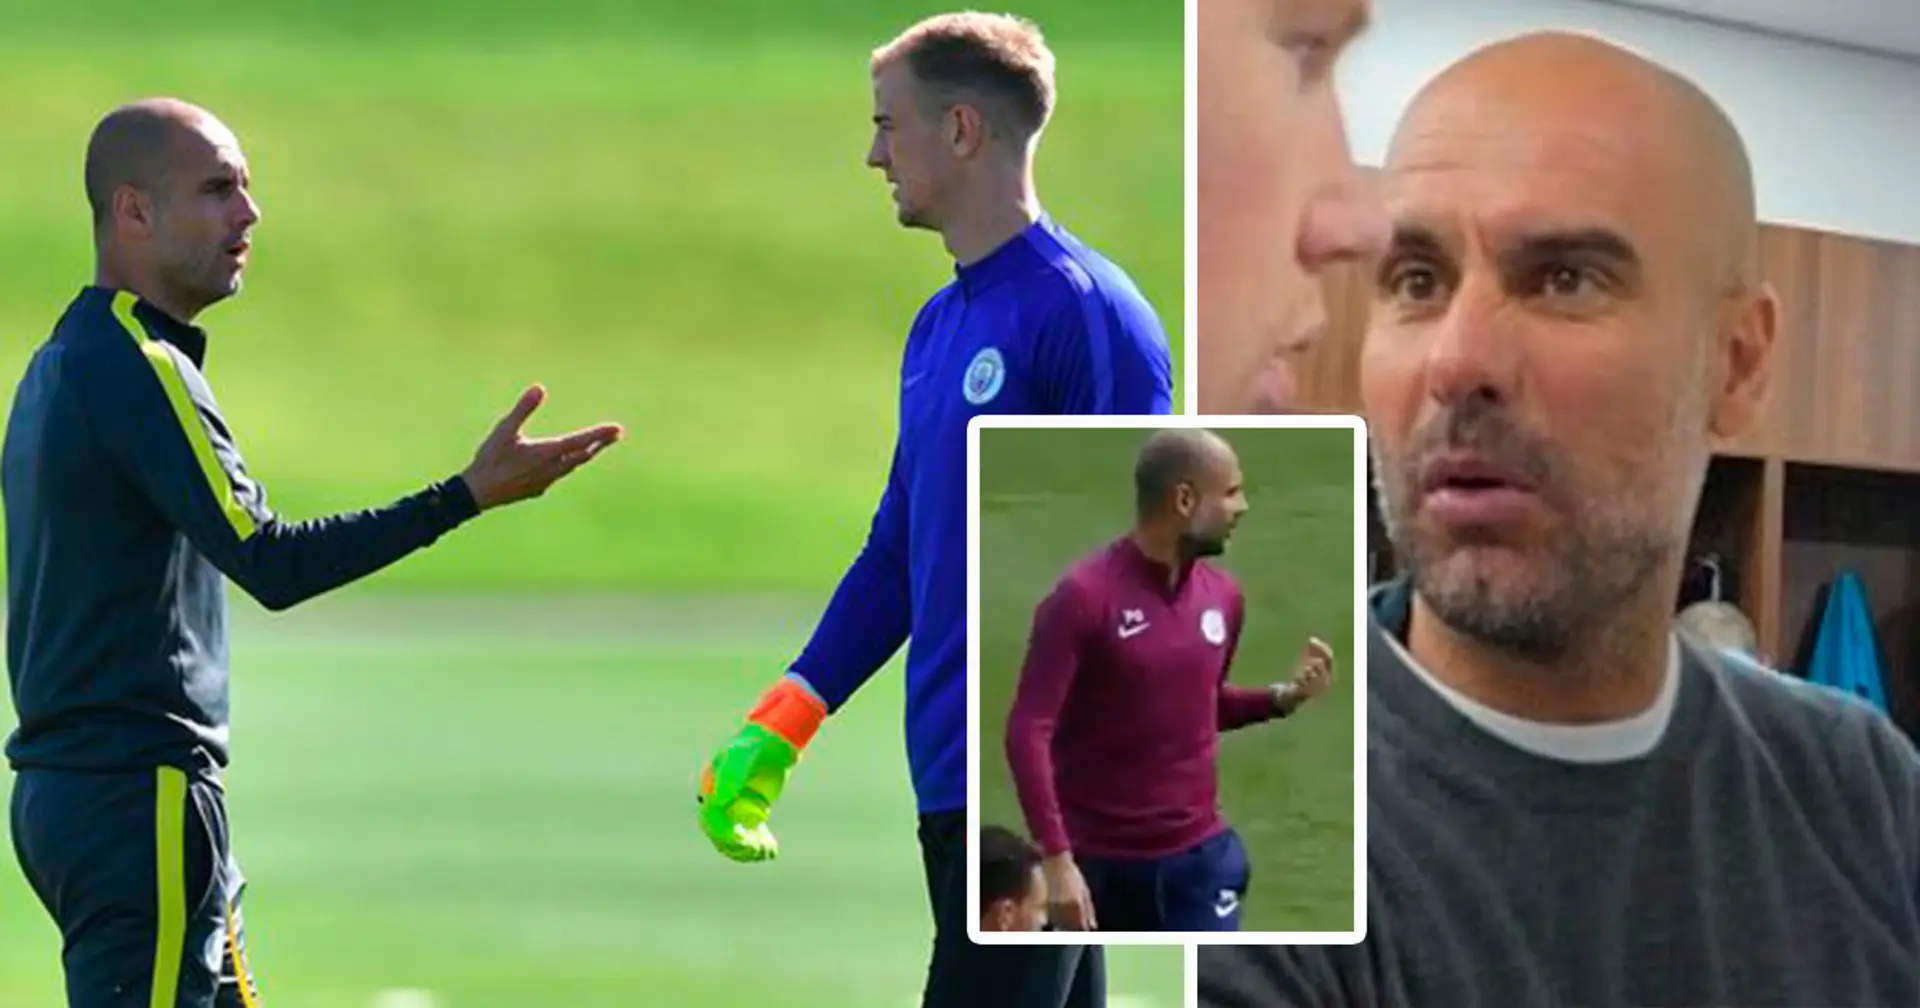 Joe Hart opens up on conversation with Pep Guardiola that ended his Manchester City career